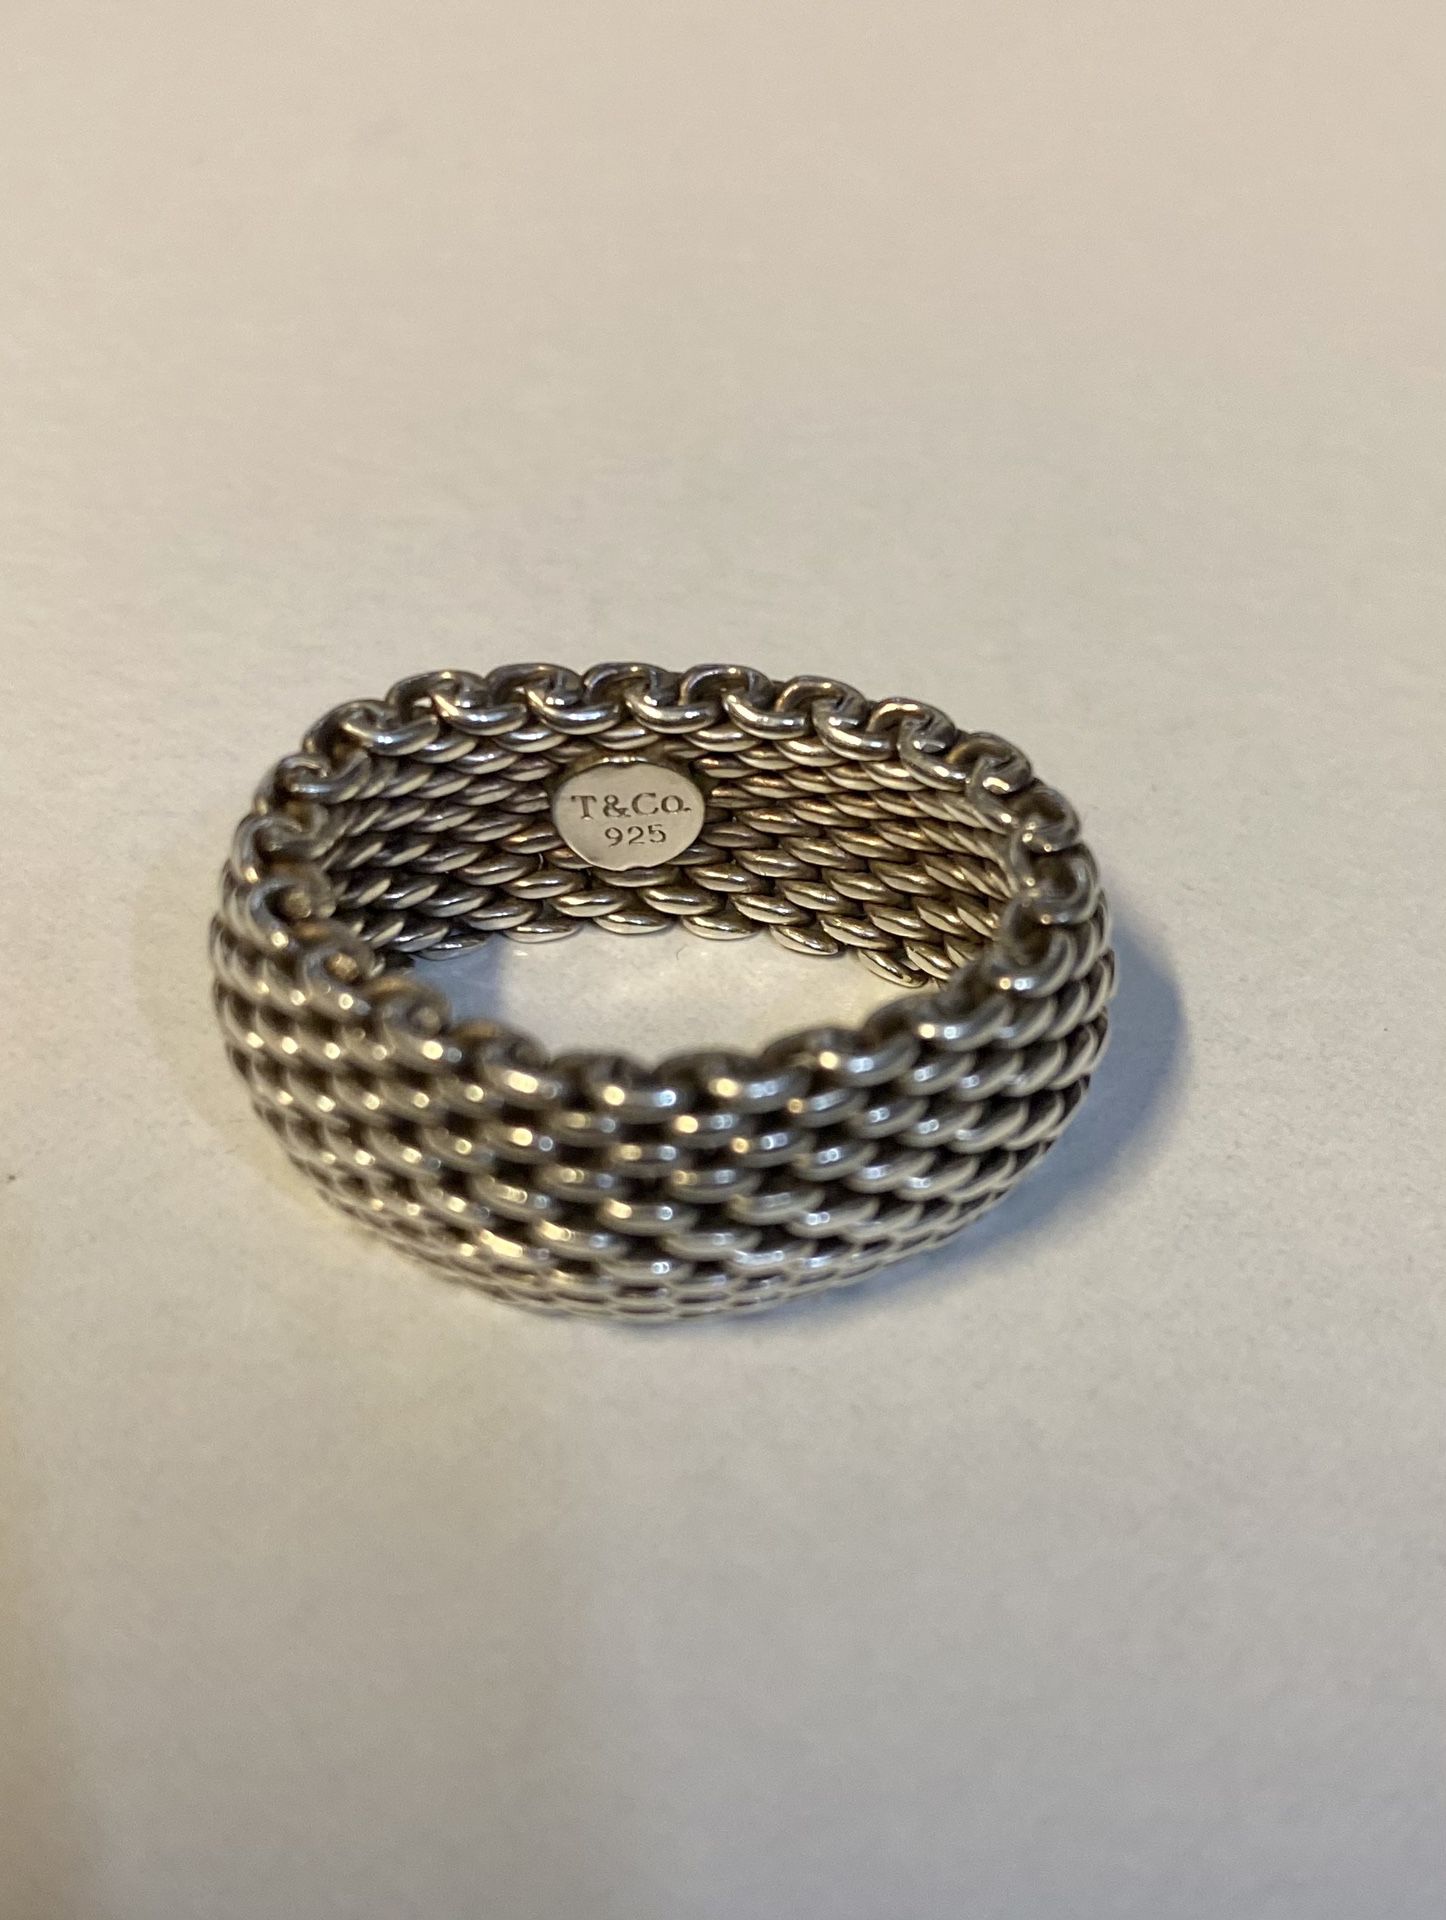 Authentic Tiffany & Co. 925 Sterling Silver Somerset Mesh Ring